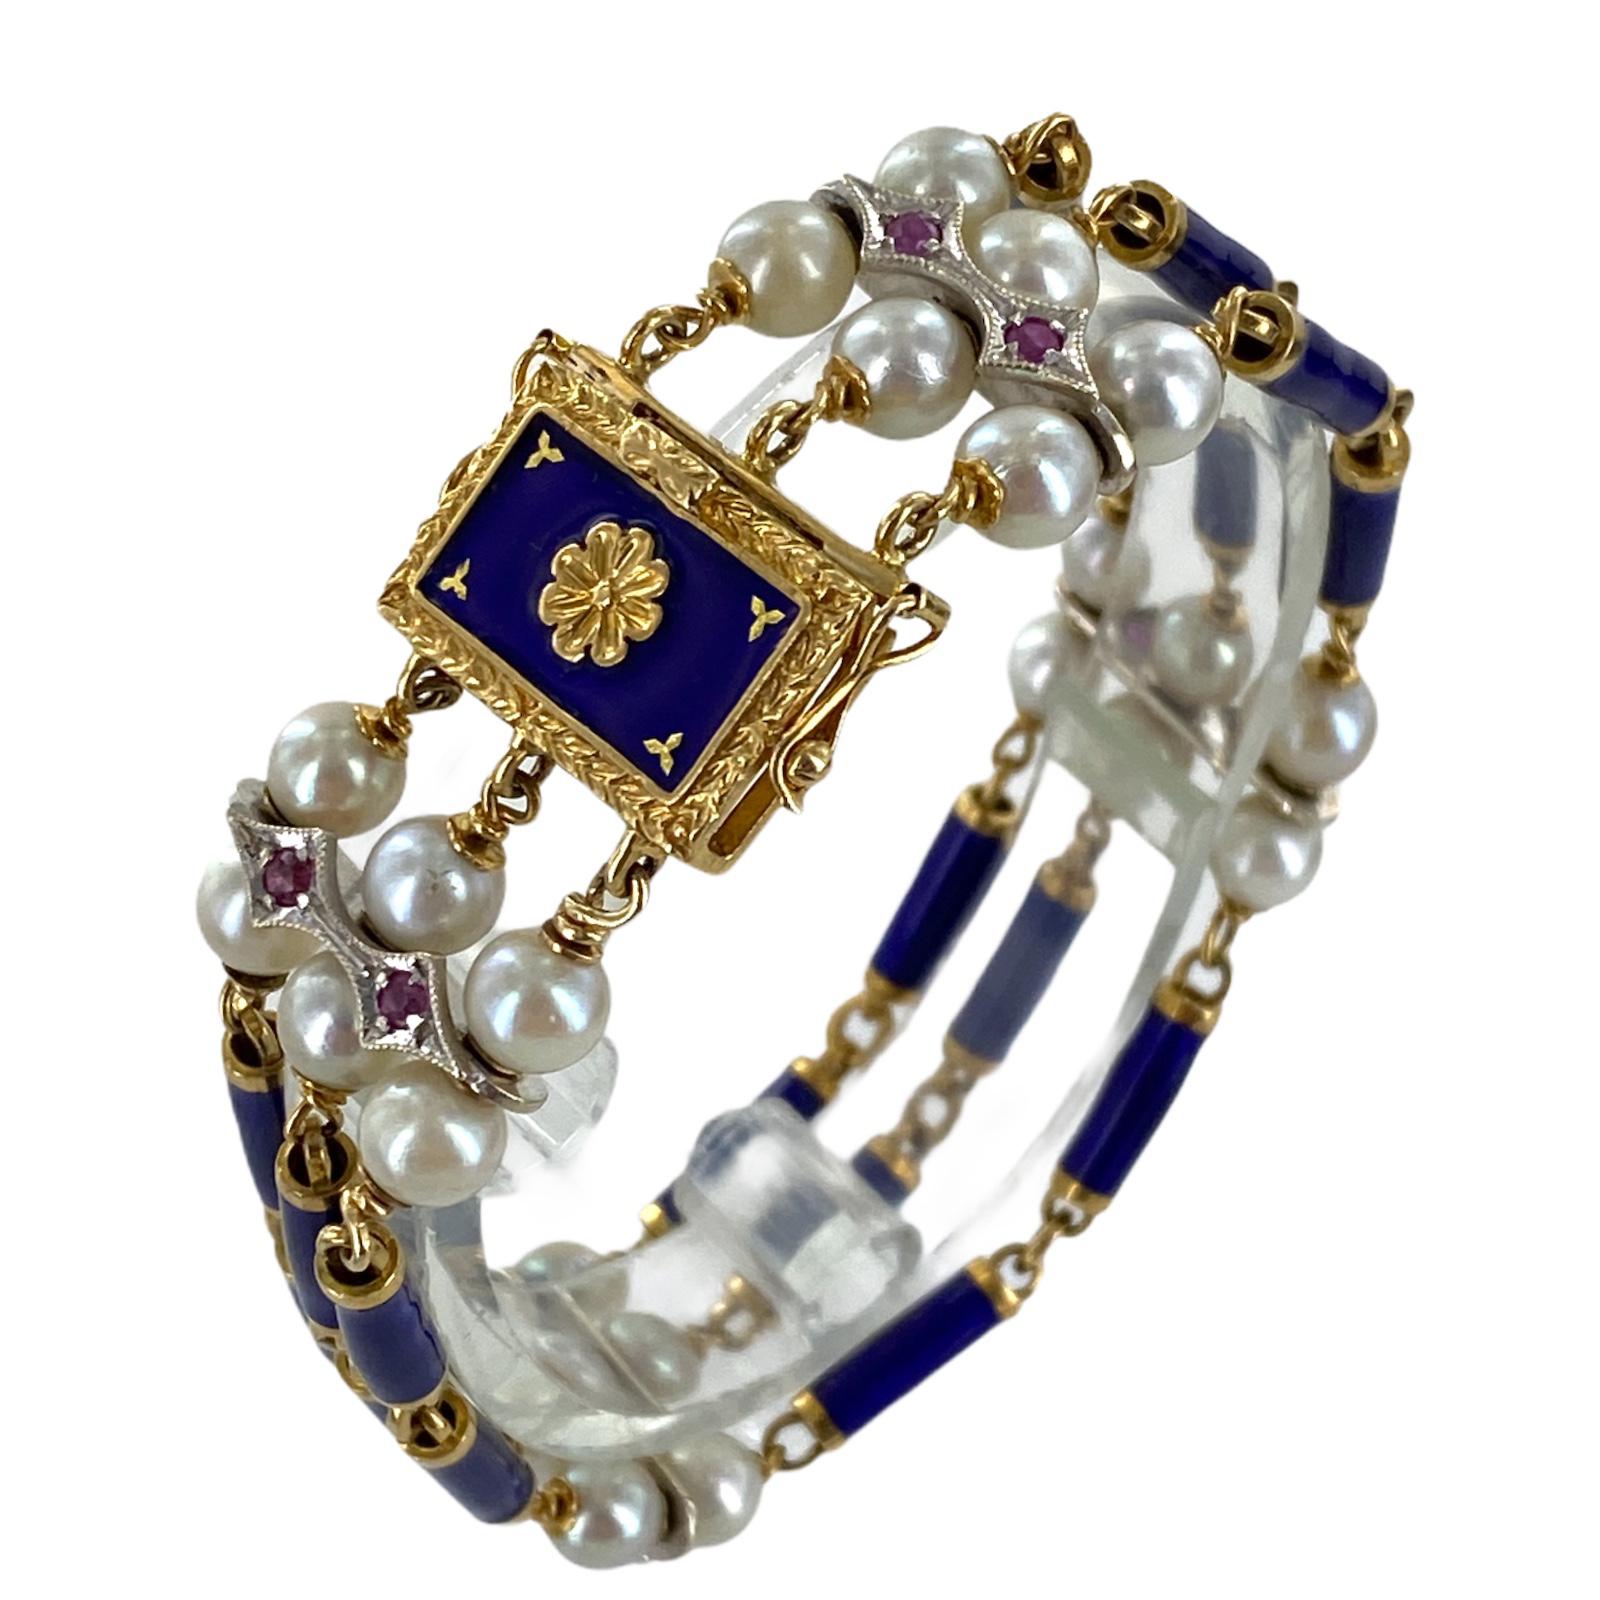 Beautiful Italian blue enamel, cultured pearl, and ruby bracelet fashioned in 18 karat yellow gold. The bracelet, circa 1960's, features three rows of blue enamel links, cultured pearls links set with ruby gemstones, and a blue enamel clasp. The